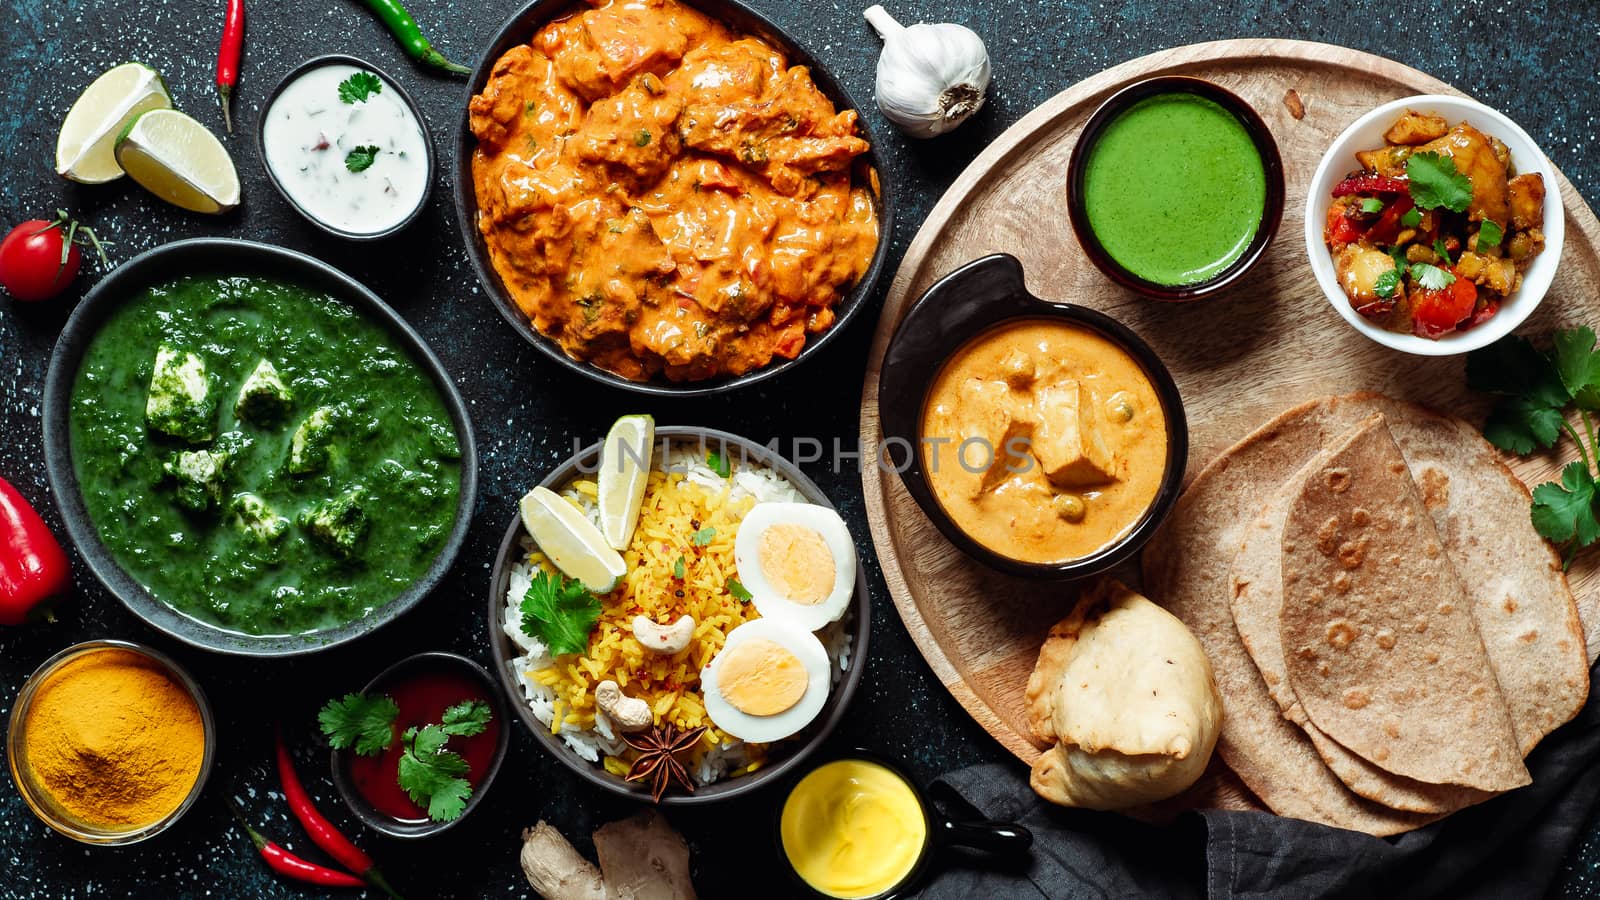 Indian cuisine dishes: tikka masala, paneer, samosa, chapati, chutney, spices. Indian food on dark background. Assortment indian meal top view or flat lay.